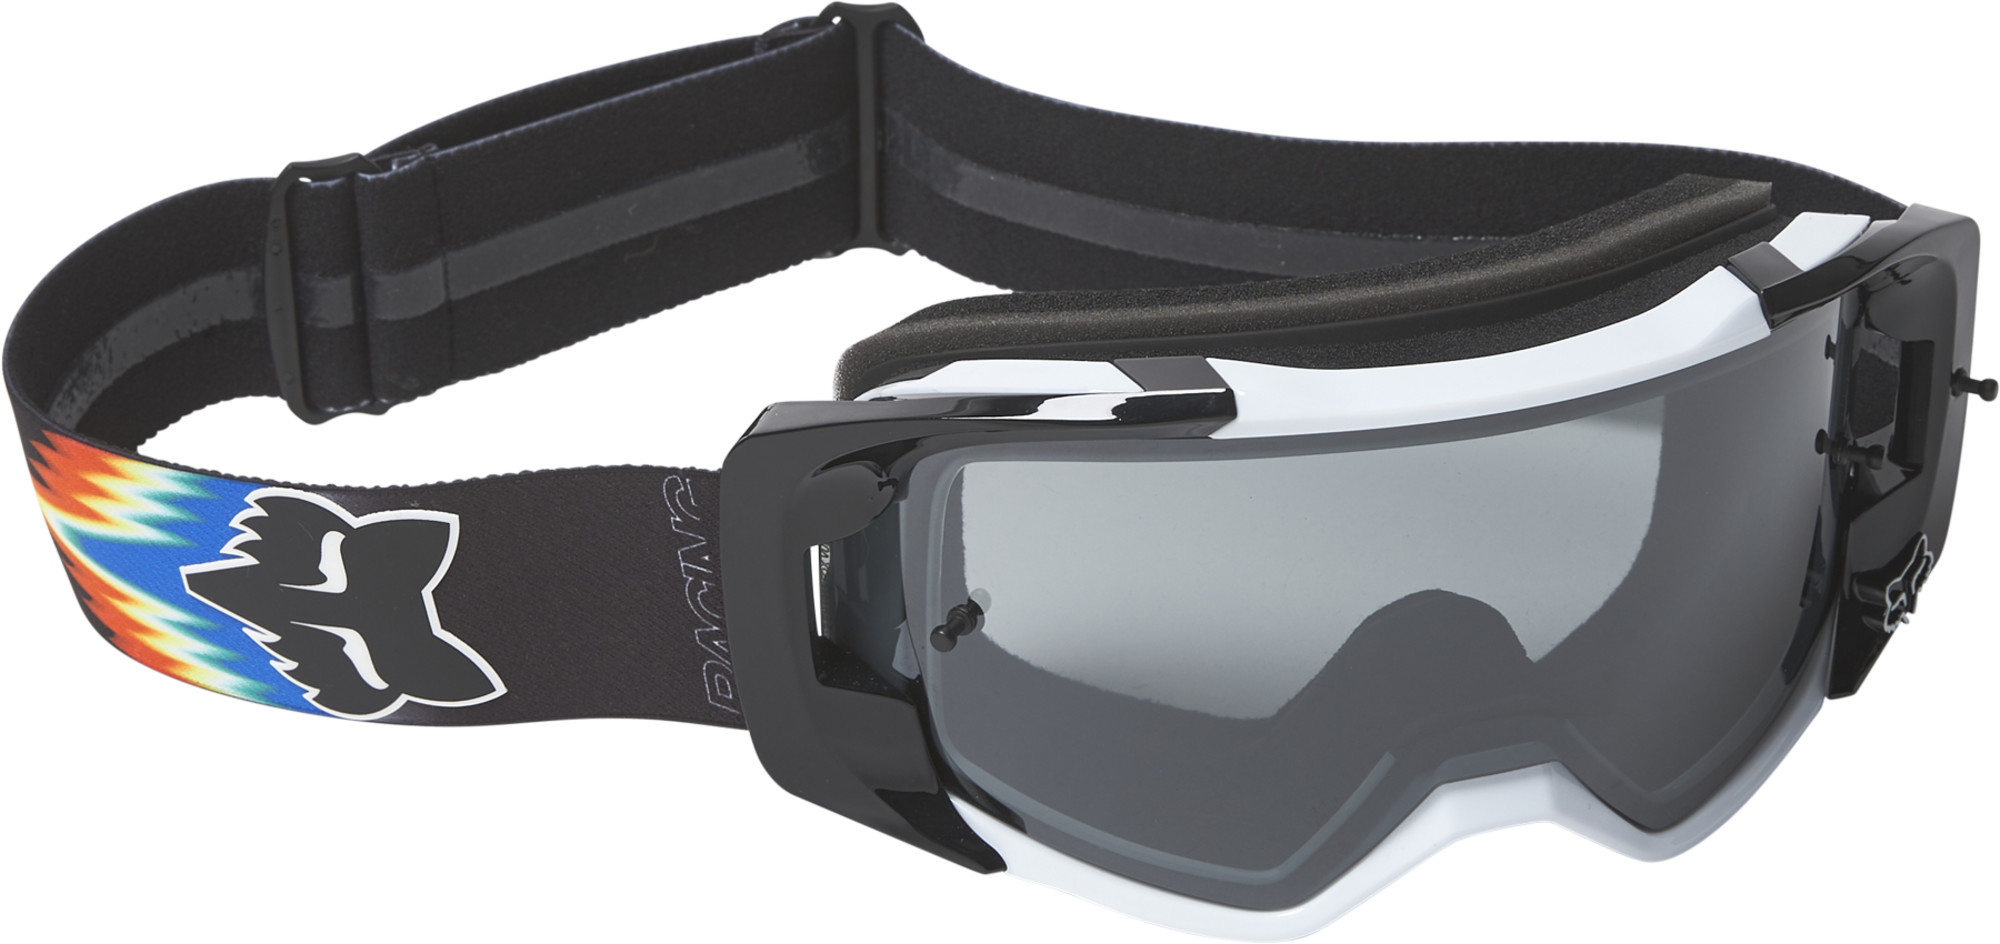 fox racing goggles adult vue relm spark